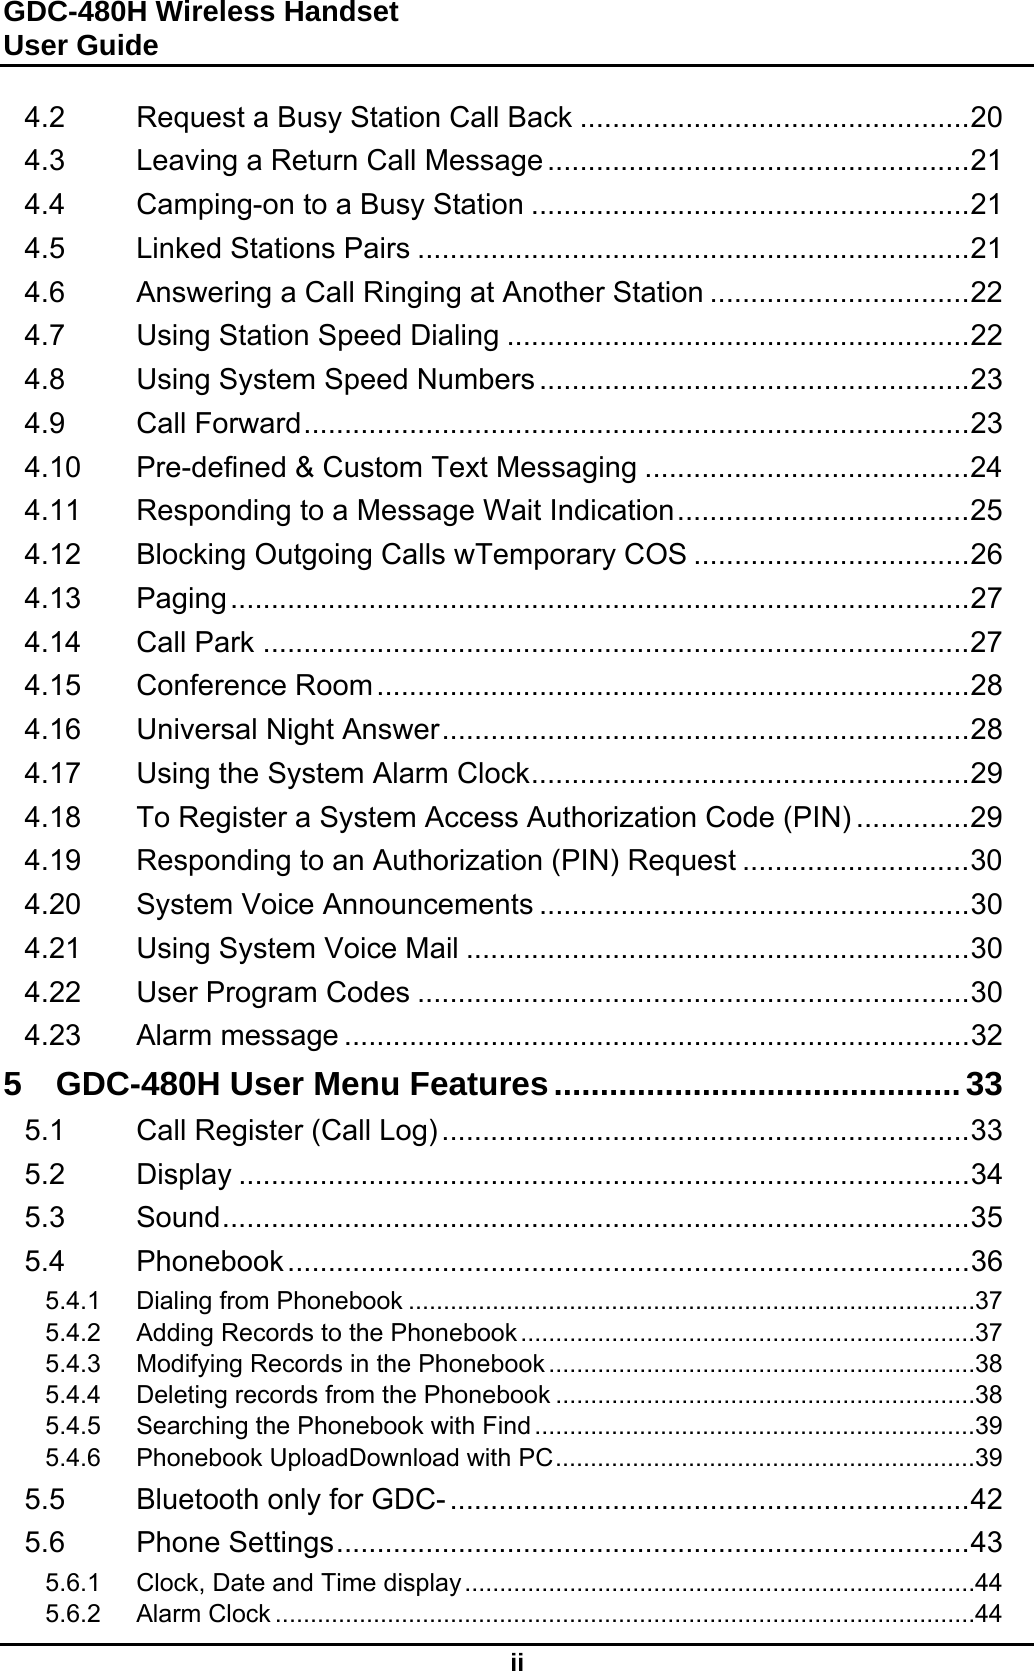 GDC-480H Wireless Handset User Guide  ii 4.2 Request a Busy Station Call Back ................................................ 20 4.3 Leaving a Return Call Message .................................................... 21 4.4 Camping-on to a Busy Station ...................................................... 21 4.5 Linked Stations Pairs .................................................................... 21 4.6 Answering a Call Ringing at Another Station ................................ 22 4.7 Using Station Speed Dialing ......................................................... 22 4.8 Using System Speed Numbers ..................................................... 23 4.9 Call Forward .................................................................................. 23 4.10 Pre-defined &amp; Custom Text Messaging ........................................ 24 4.11 Responding to a Message Wait Indication .................................... 25 4.12 Blocking Outgoing Calls wTemporary COS .................................. 26 4.13 Paging ........................................................................................... 27 4.14 Call Park ....................................................................................... 27 4.15 Conference Room ......................................................................... 28 4.16 Universal Night Answer ................................................................. 28 4.17 Using the System Alarm Clock ...................................................... 29 4.18 To Register a System Access Authorization Code (PIN) .............. 29 4.19 Responding to an Authorization (PIN) Request ............................ 30 4.20 System Voice Announcements ..................................................... 30 4.21 Using System Voice Mail .............................................................. 30 4.22 User Program Codes .................................................................... 30 4.23 Alarm message ............................................................................. 32 5 GDC-480H User Menu Features ............................................ 33 5.1 Call Register (Call Log) ................................................................. 33 5.2 Display .......................................................................................... 34 5.3 Sound ............................................................................................ 35 5.4 Phonebook .................................................................................... 36 5.4.1 Dialing from Phonebook ................................................................................. 37 5.4.2 Adding Records to the Phonebook ................................................................. 37 5.4.3 Modifying Records in the Phonebook ............................................................. 38 5.4.4 Deleting records from the Phonebook ............................................................ 38 5.4.5 Searching the Phonebook with Find ............................................................... 39 5.4.6 Phonebook UploadDownload with PC ............................................................ 39 5.5 Bluetooth only for GDC- ................................................................ 42 5.6 Phone Settings .............................................................................. 43 5.6.1 Clock, Date and Time display ......................................................................... 44 5.6.2 Alarm Clock .................................................................................................... 44 